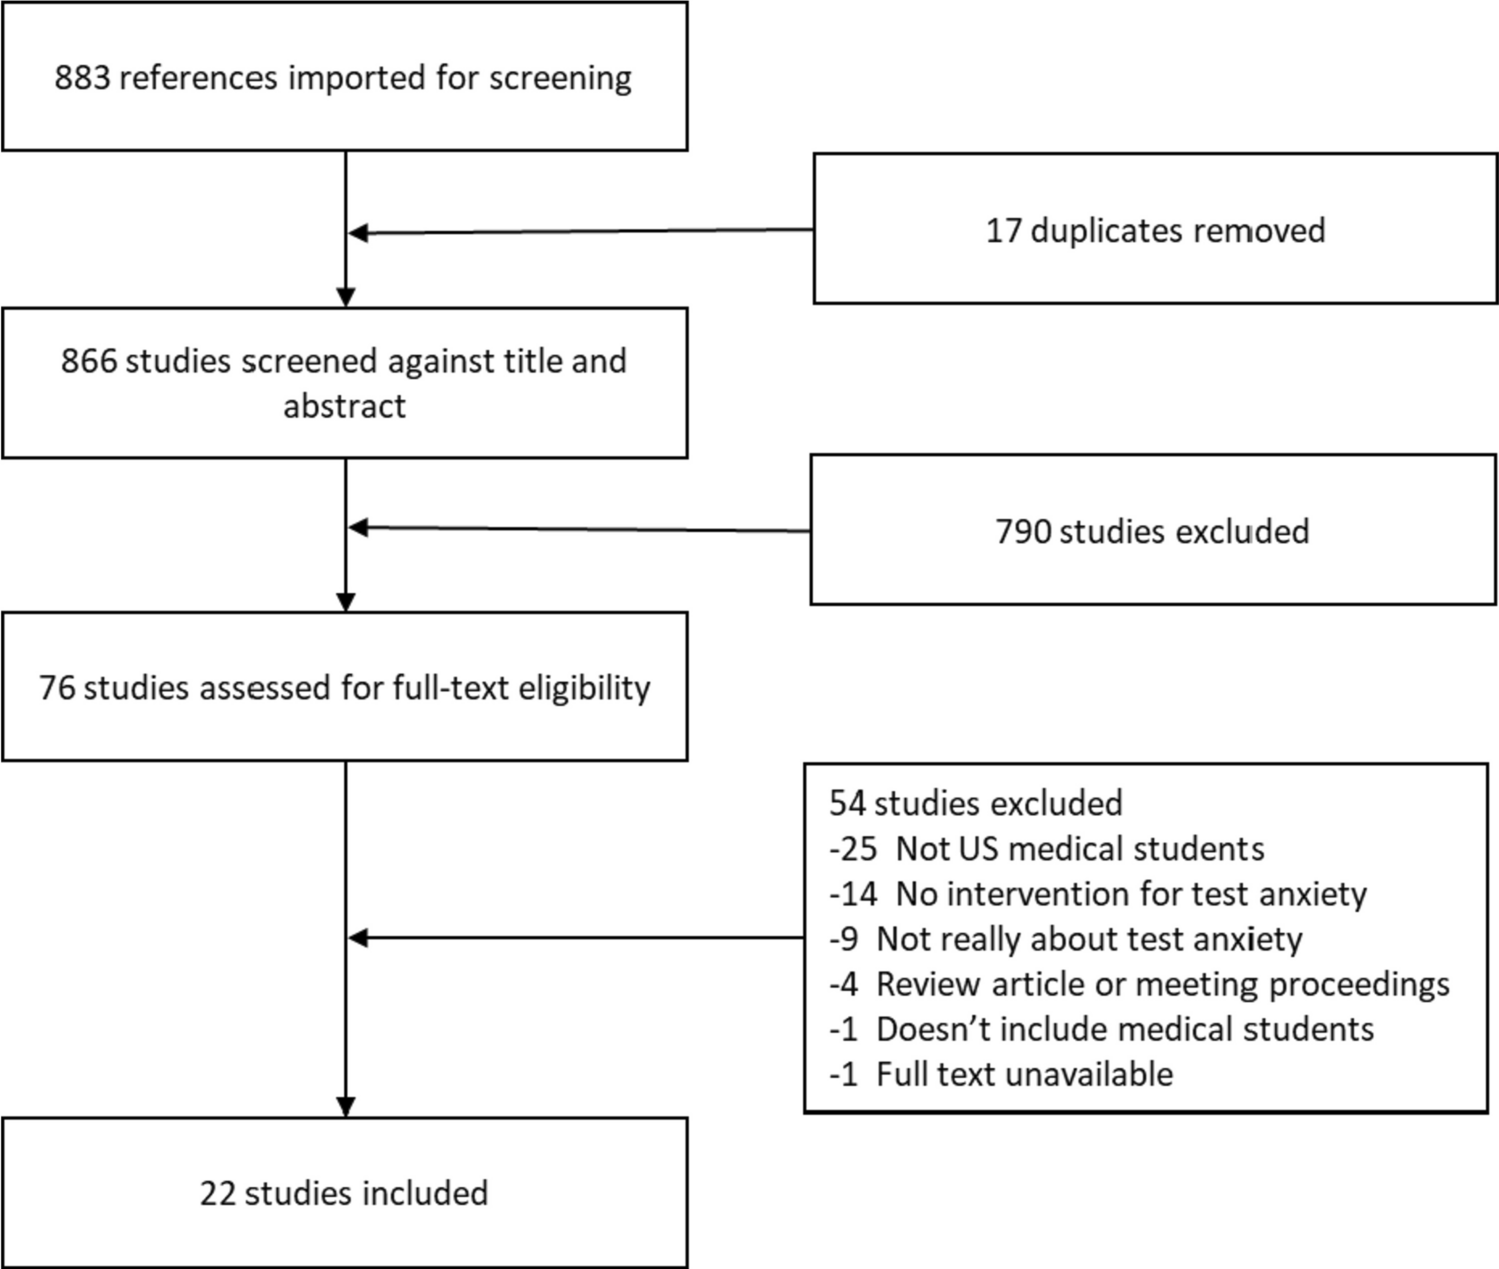 Test Anxiety Among US Medical Students: A Review of the Current Literature